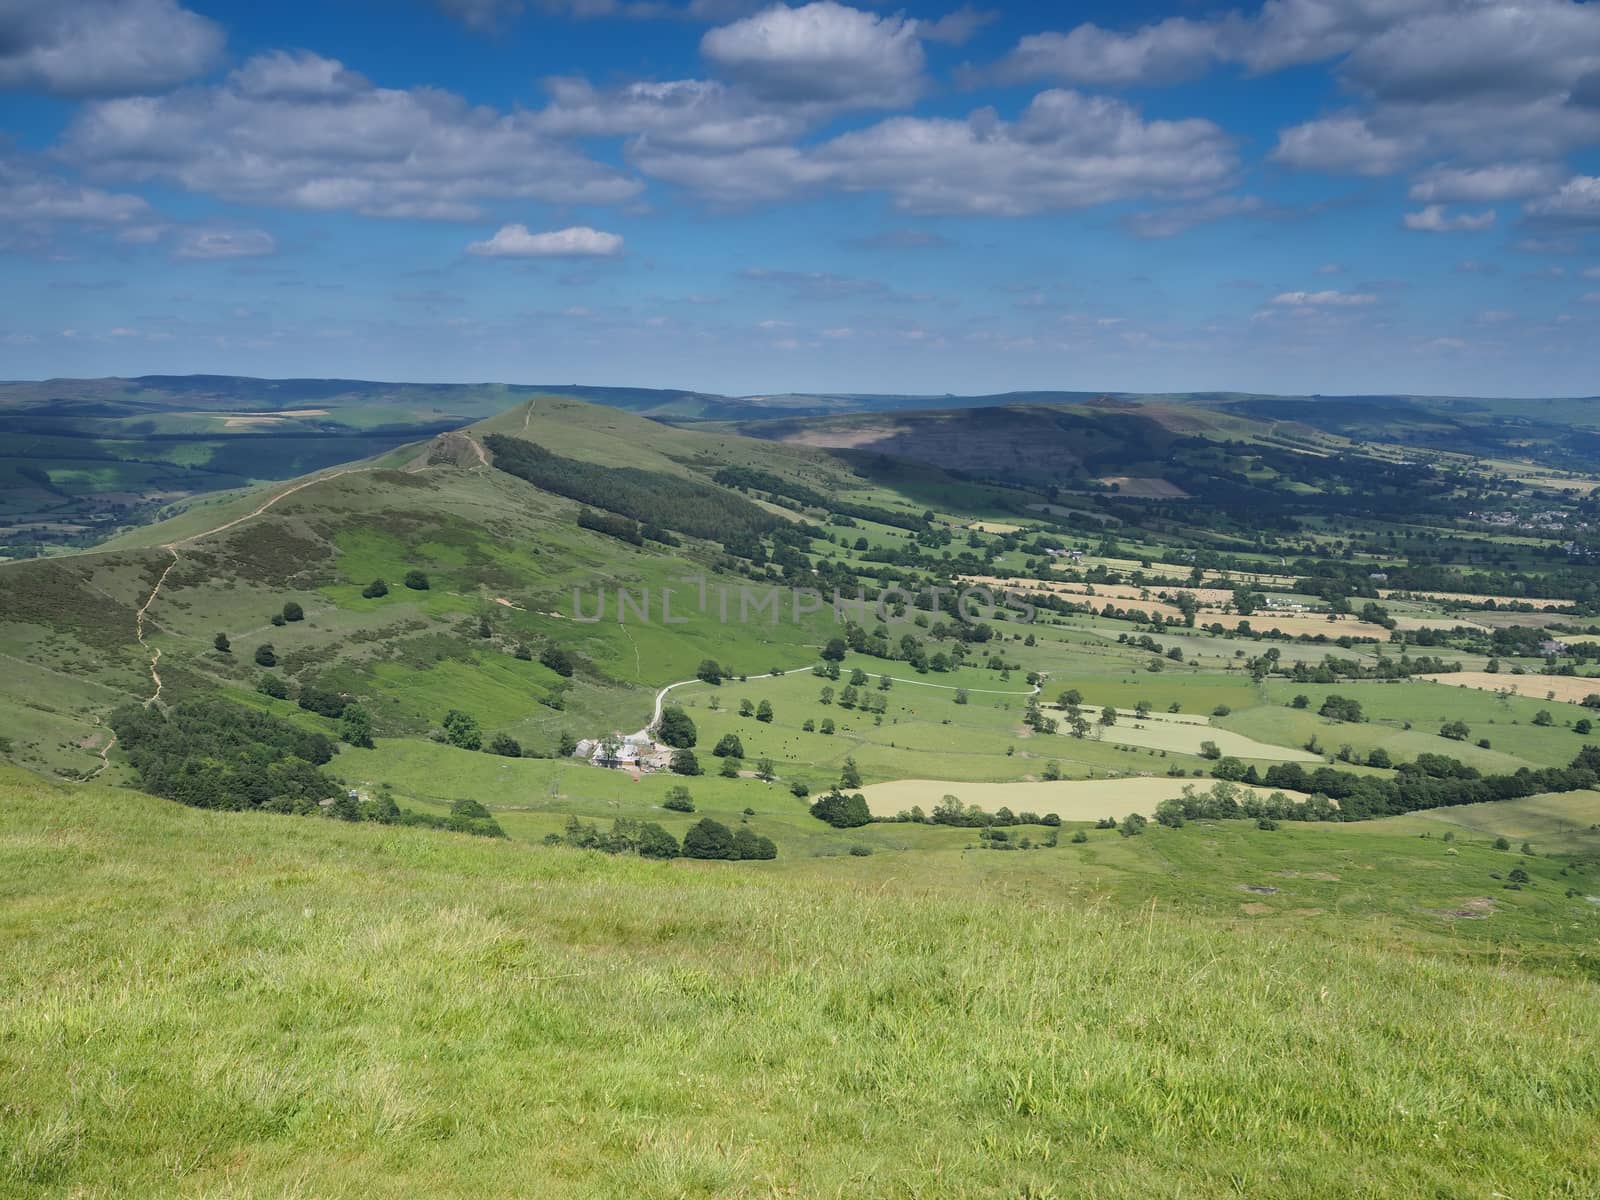 View from Mam Tor over Edale and Hope valleys with Back Tor and Lose Hill in the background, Peak District National Park, UK